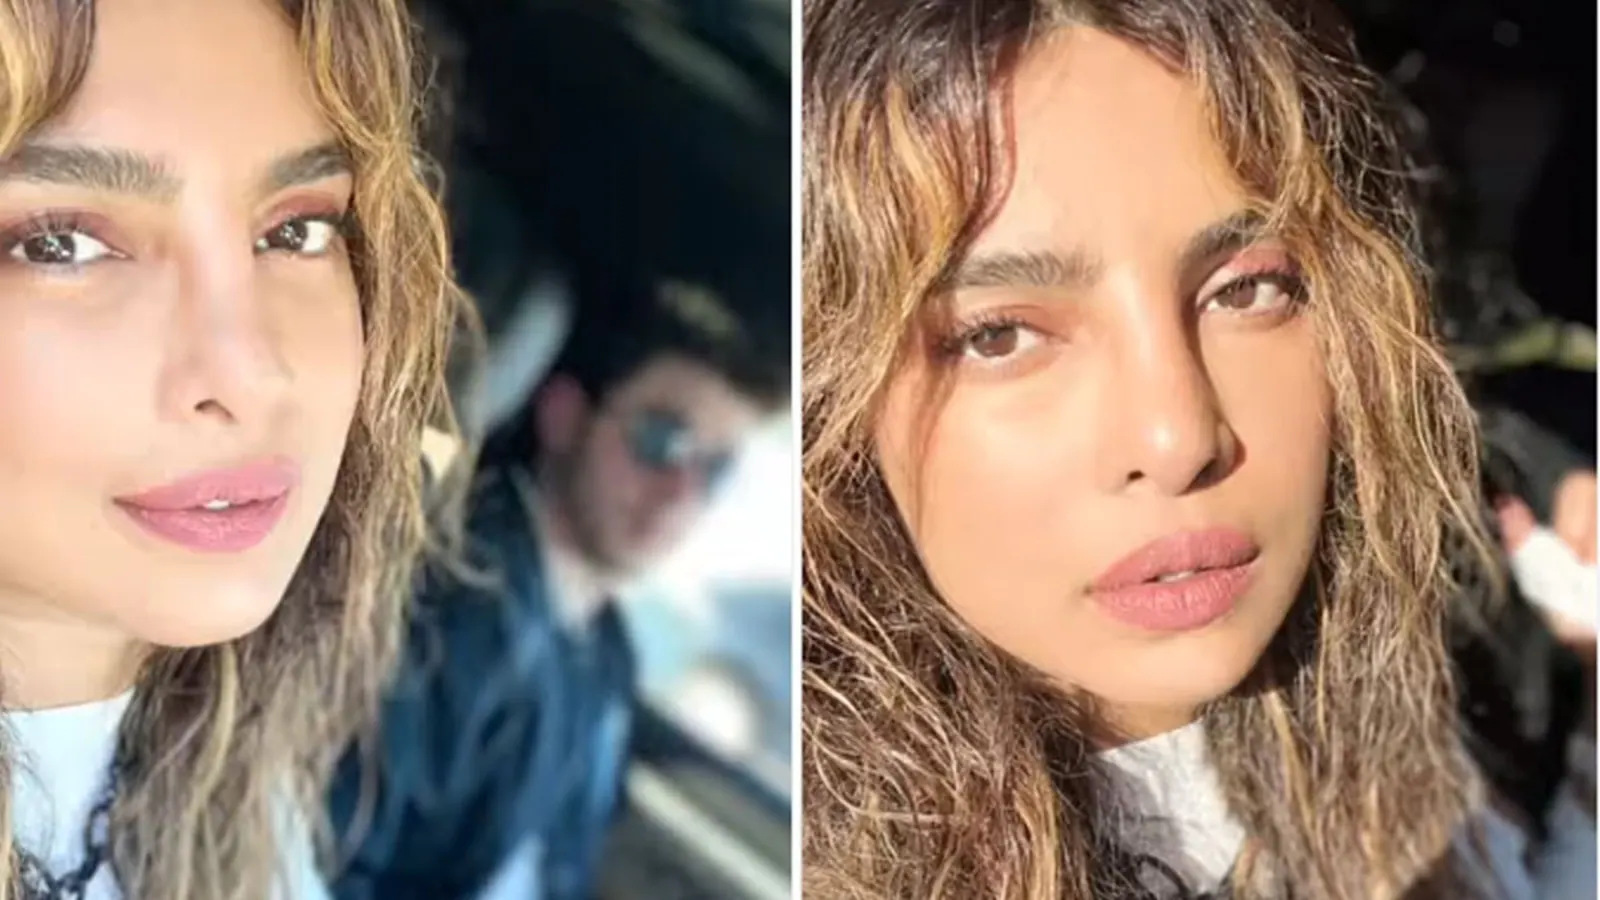 Priyanka Chopra shares glimpses of her Sunday outing with Nick Jonas, fan asks why he’s blurred in the photos